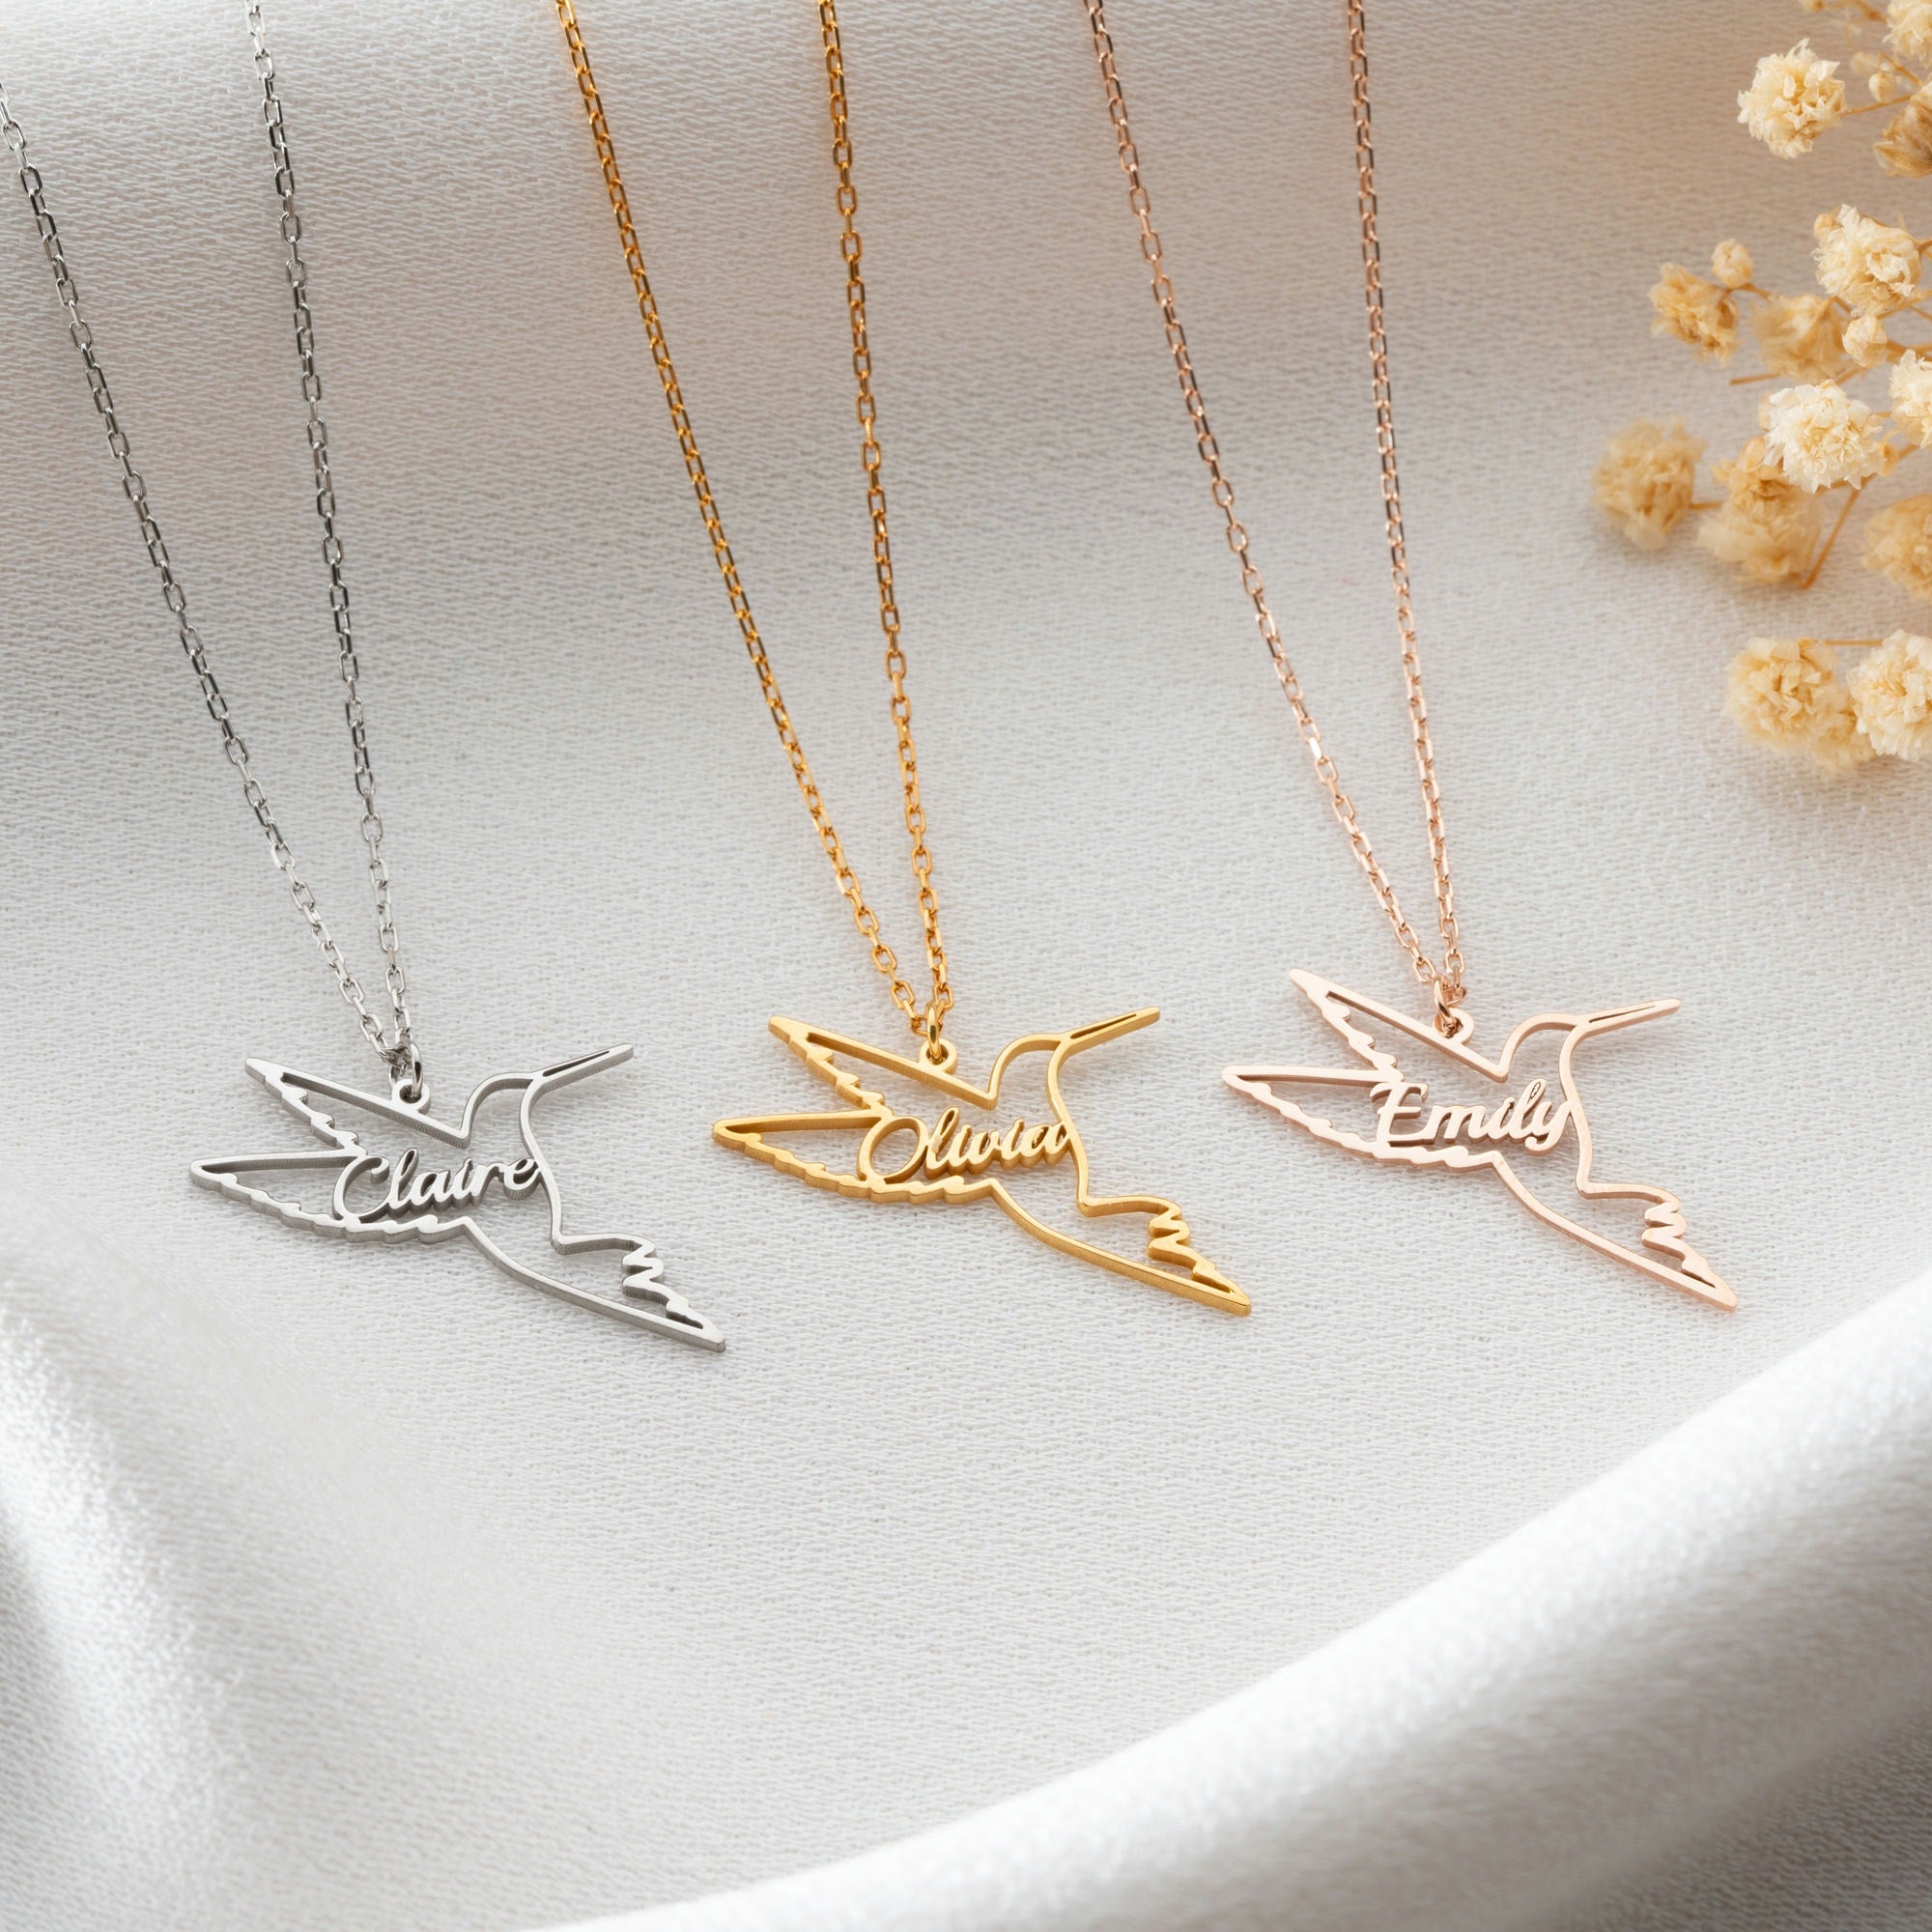 Hummingbird Necklace With Name